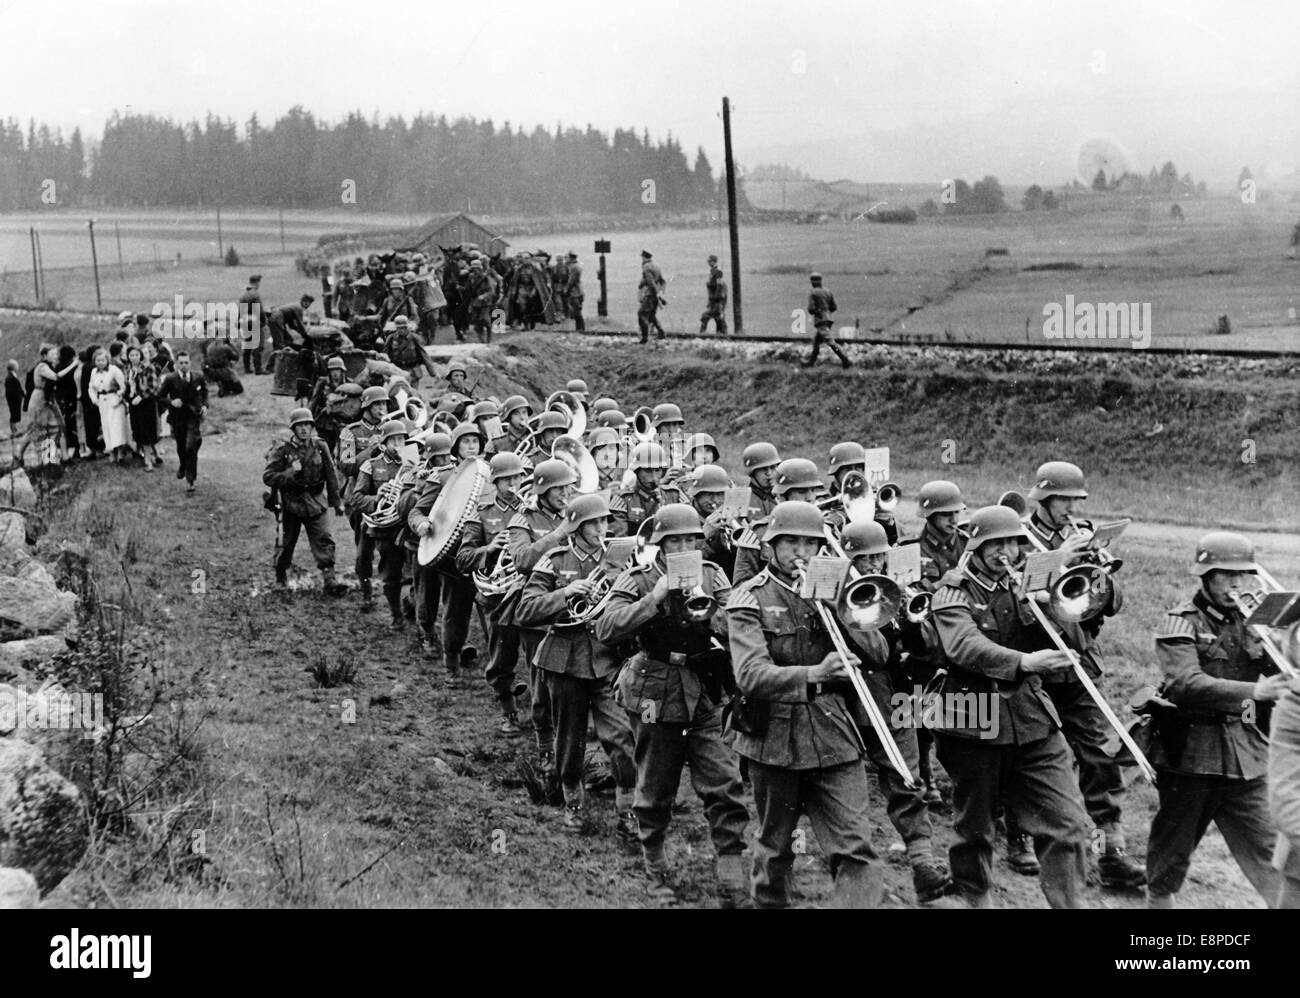 The Nazi propaganda picture shows German Wehrmacht soldiers crossing the German-Czech border near Haidmuehle in the Sudetenland, October 1938. The original text from a Nazi news report on the back of the picture reads: 'The first pictures of the arrival of German troops in the Sudetenland (Division I). The German soldiers march into the liberated Sudetenland to the sound of a military band. (At the border near Haidmuehle).' Fotoarchiv für Zeitgeschichtee - NO WIRE SERVICE Stock Photo